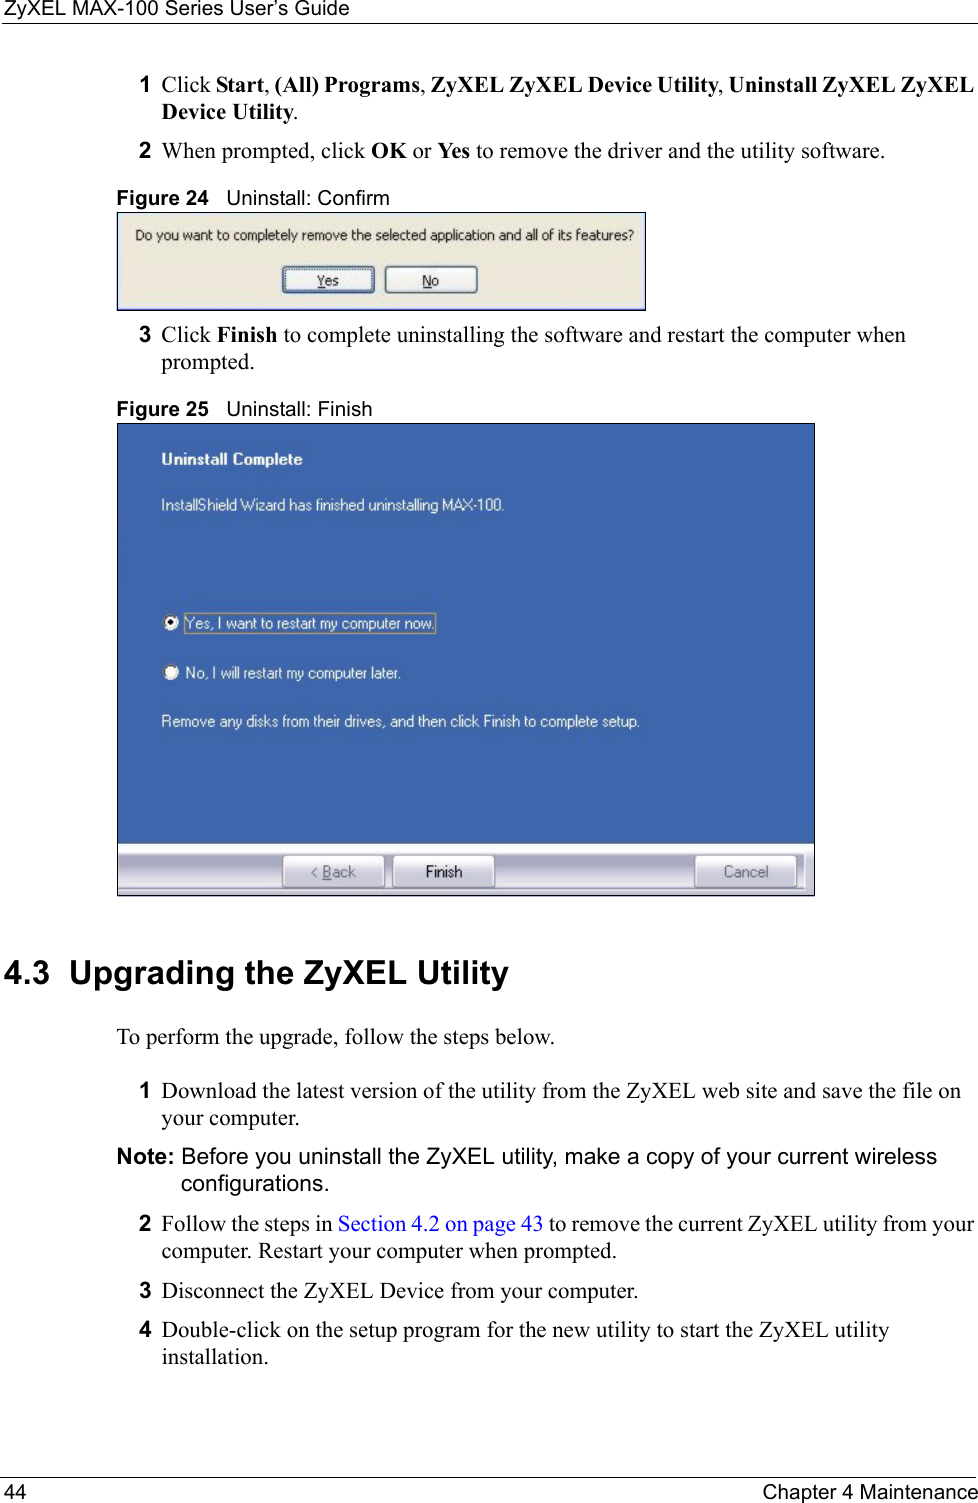 ZyXEL MAX-100 Series User’s Guide44 Chapter 4 Maintenance1Click Start, (All) Programs, ZyXEL ZyXEL Device Utility, Uninstall ZyXEL ZyXEL Device Utility.2When prompted, click OK or Yes  to remove the driver and the utility software.Figure 24   Uninstall: Confirm  3Click Finish to complete uninstalling the software and restart the computer when prompted.Figure 25   Uninstall: Finish 4.3  Upgrading the ZyXEL Utility To perform the upgrade, follow the steps below.1Download the latest version of the utility from the ZyXEL web site and save the file on your computer.Note: Before you uninstall the ZyXEL utility, make a copy of your current wireless configurations.2Follow the steps in Section 4.2 on page 43 to remove the current ZyXEL utility from your computer. Restart your computer when prompted.3Disconnect the ZyXEL Device from your computer.4Double-click on the setup program for the new utility to start the ZyXEL utility installation.